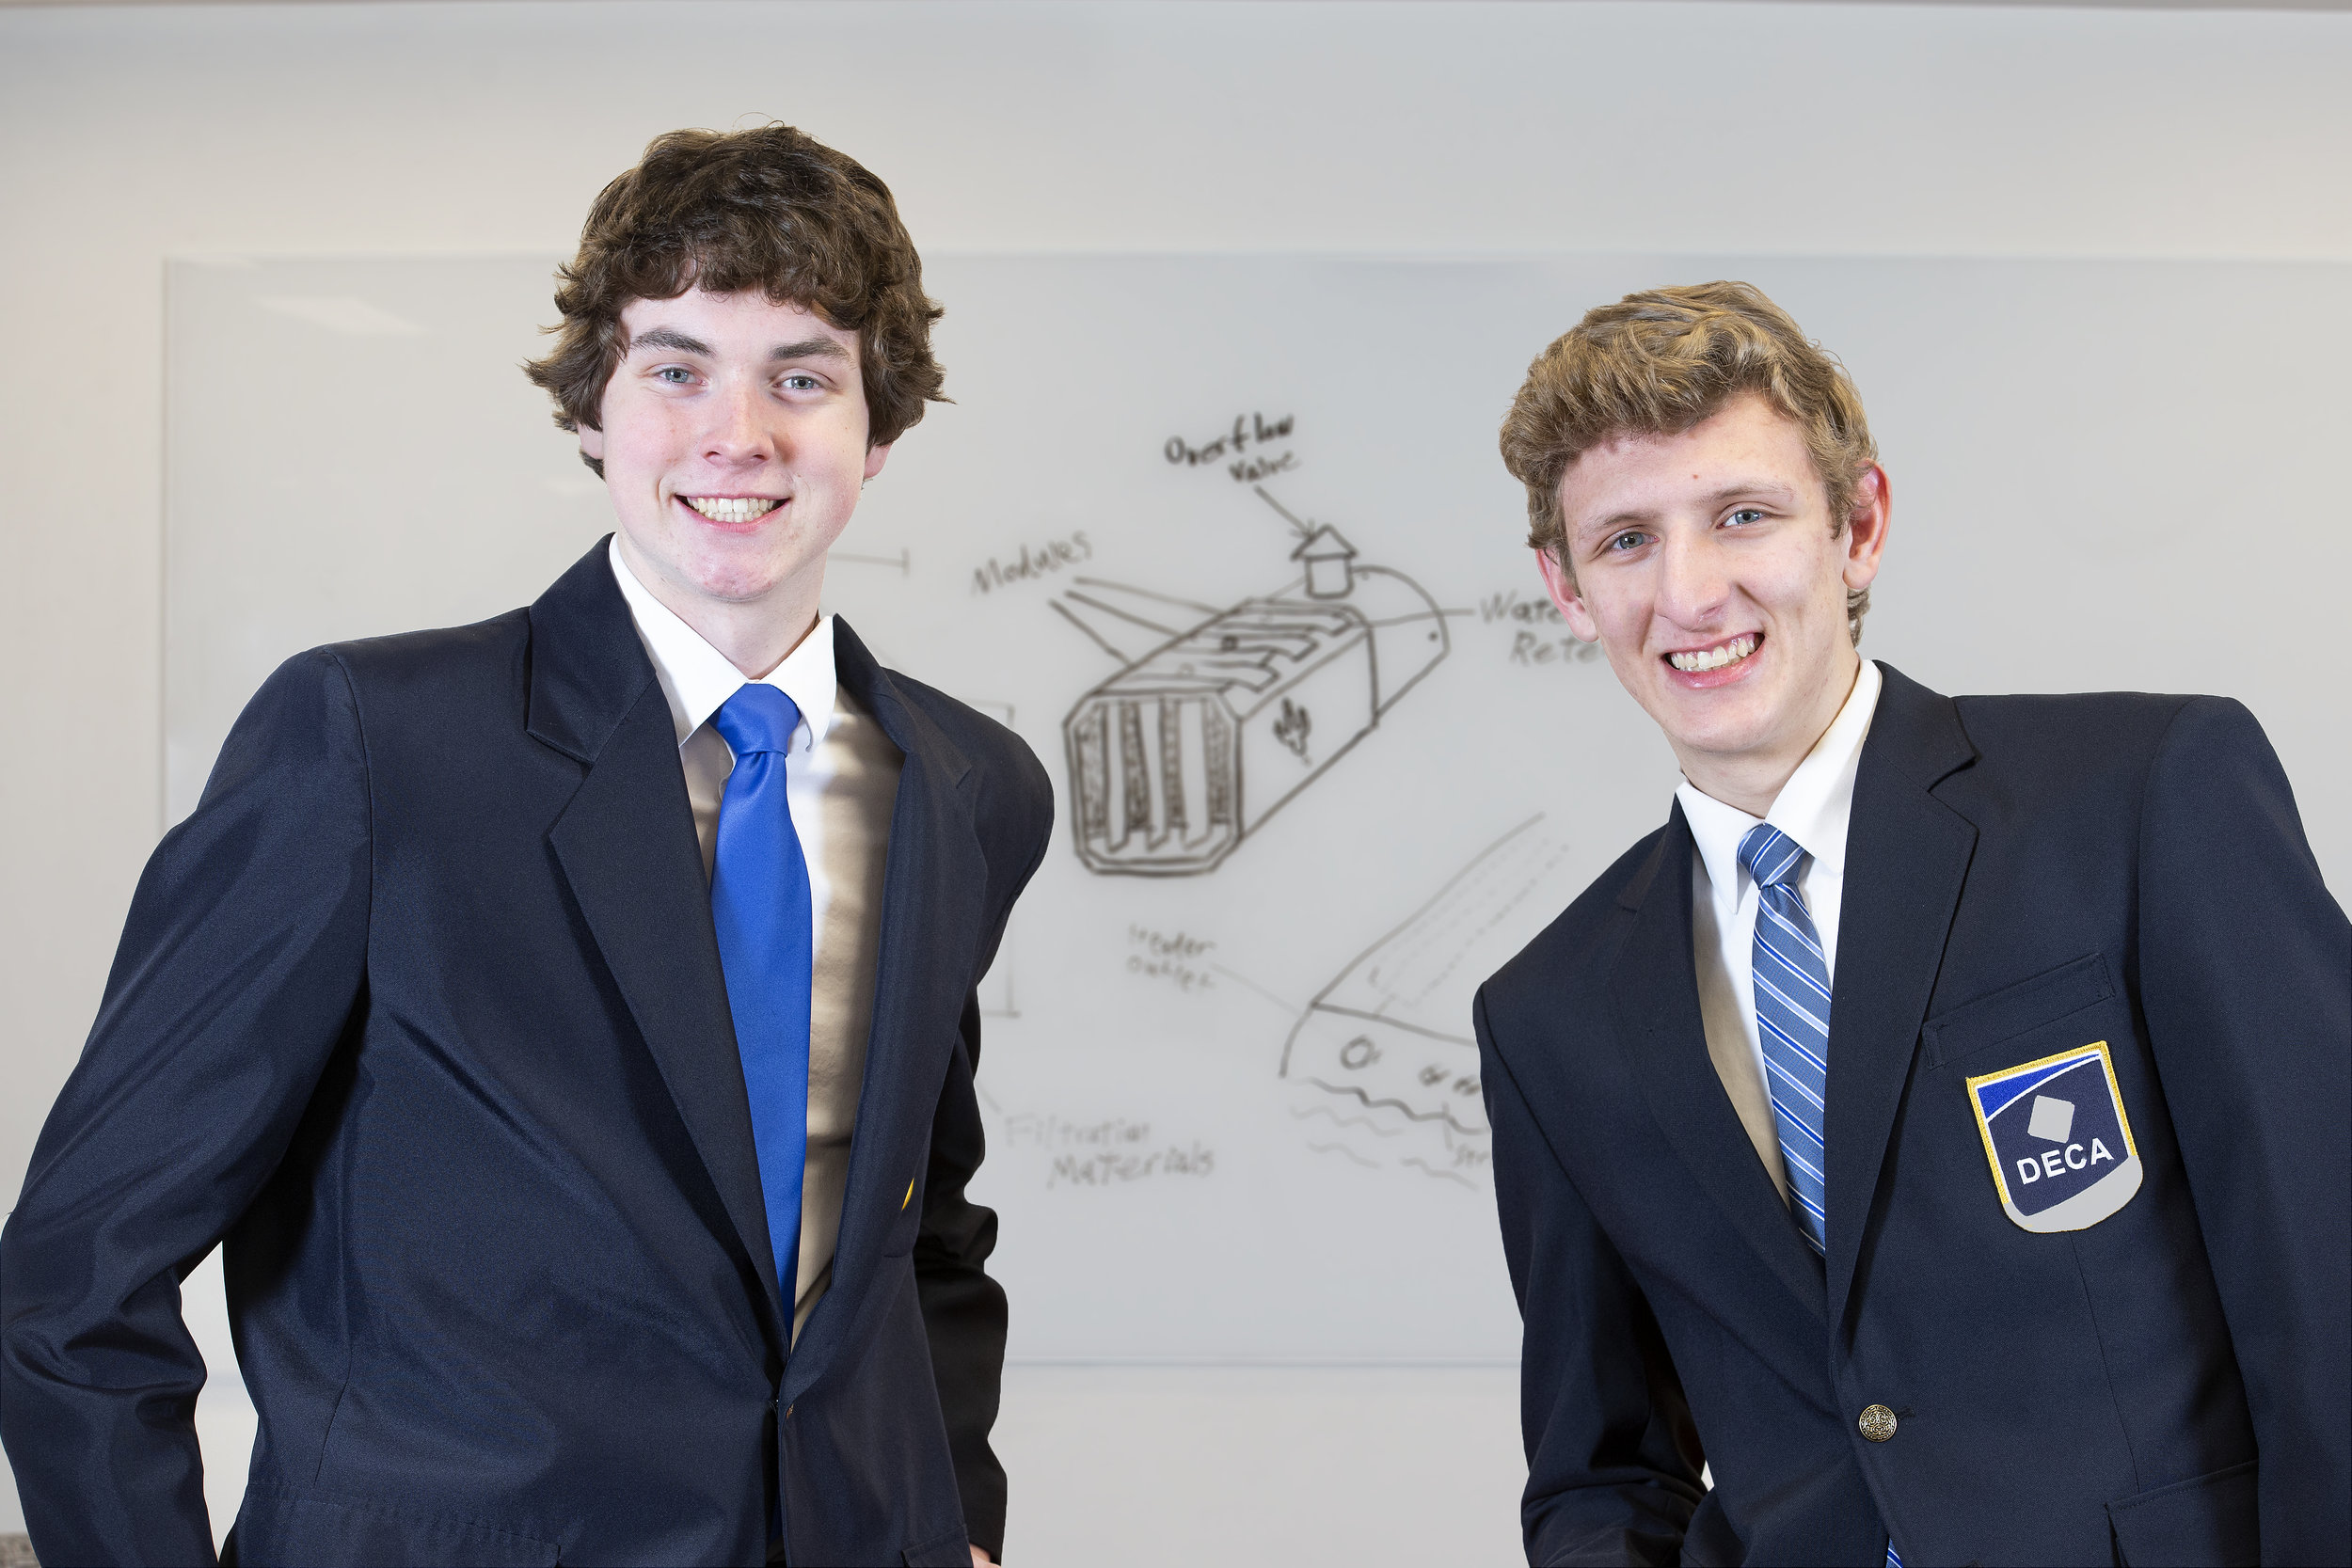 DECA Students Make The National Stage